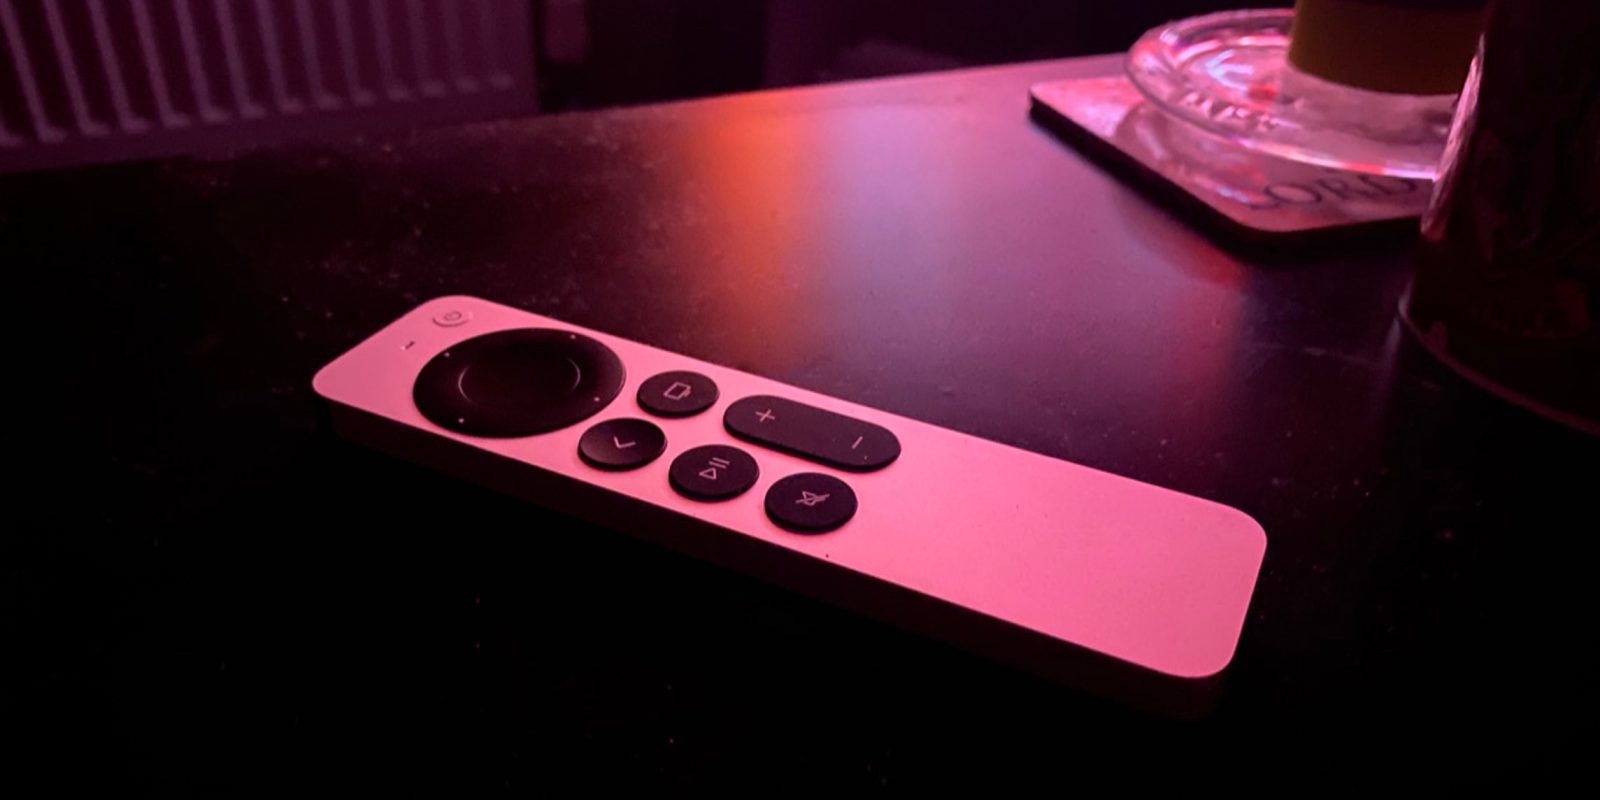 Charge the Siri Remote - Apple Support